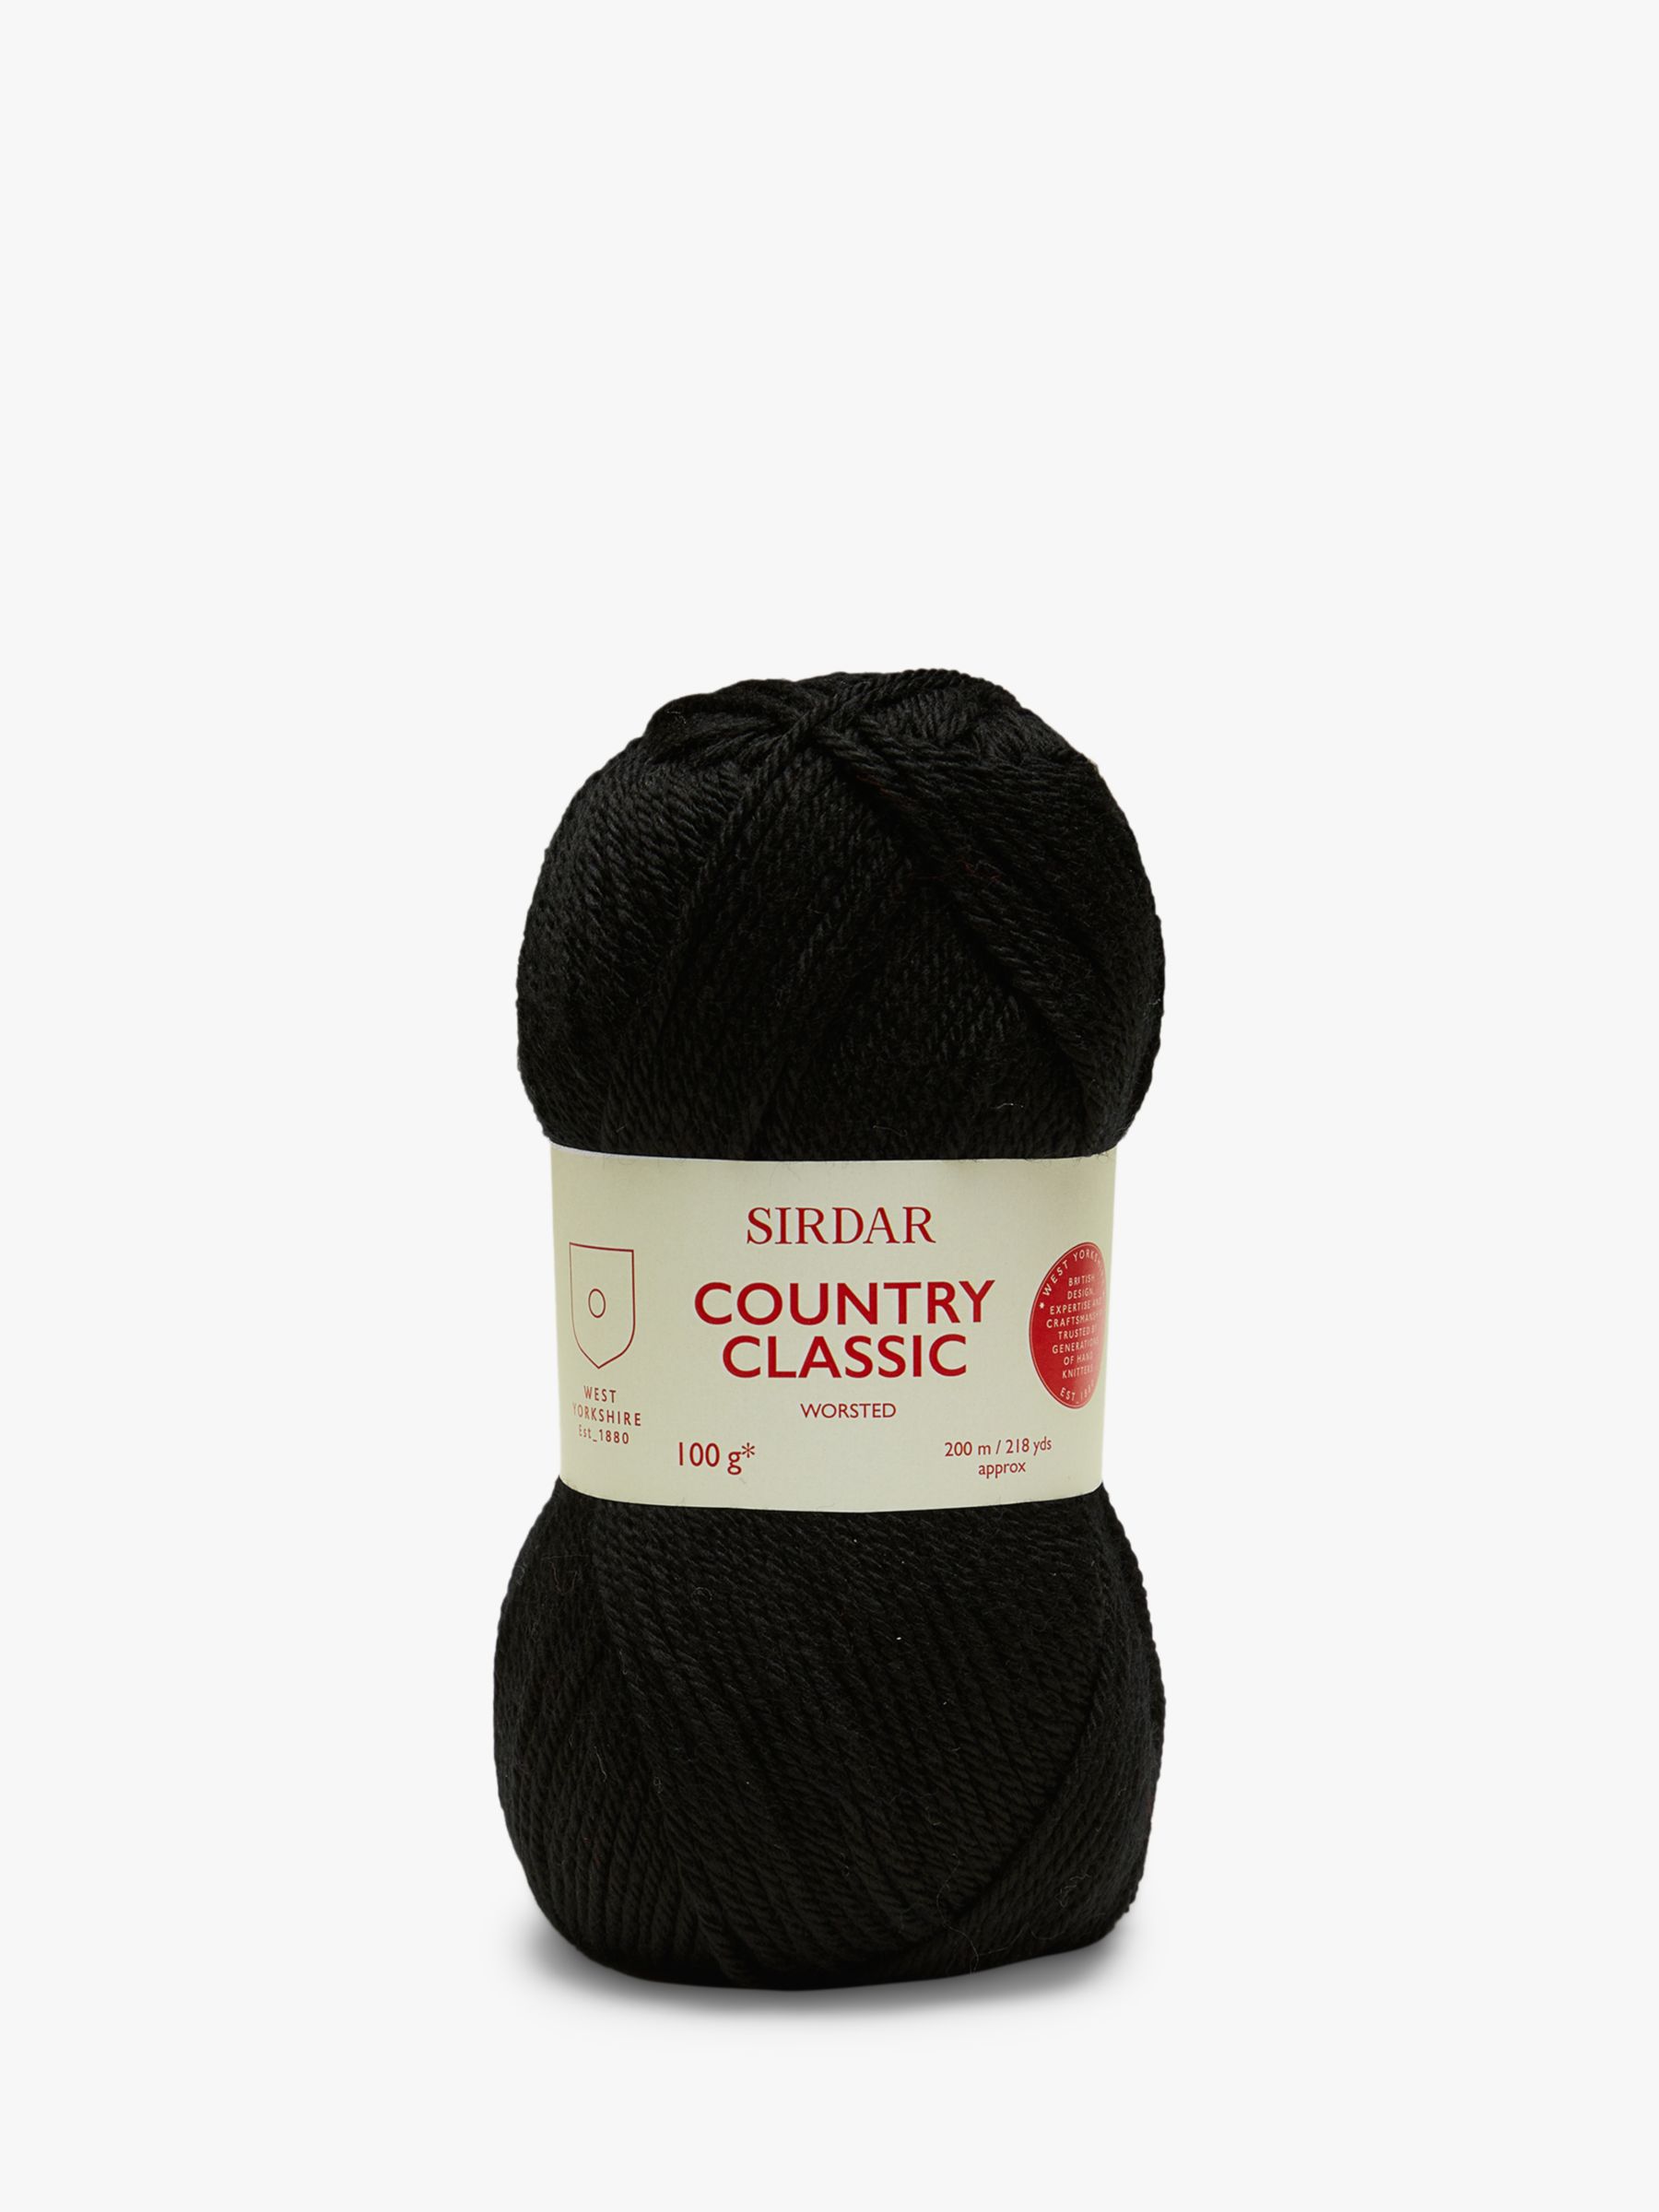 Sirdar Country Classic Worsted Yarn, 100g, Black